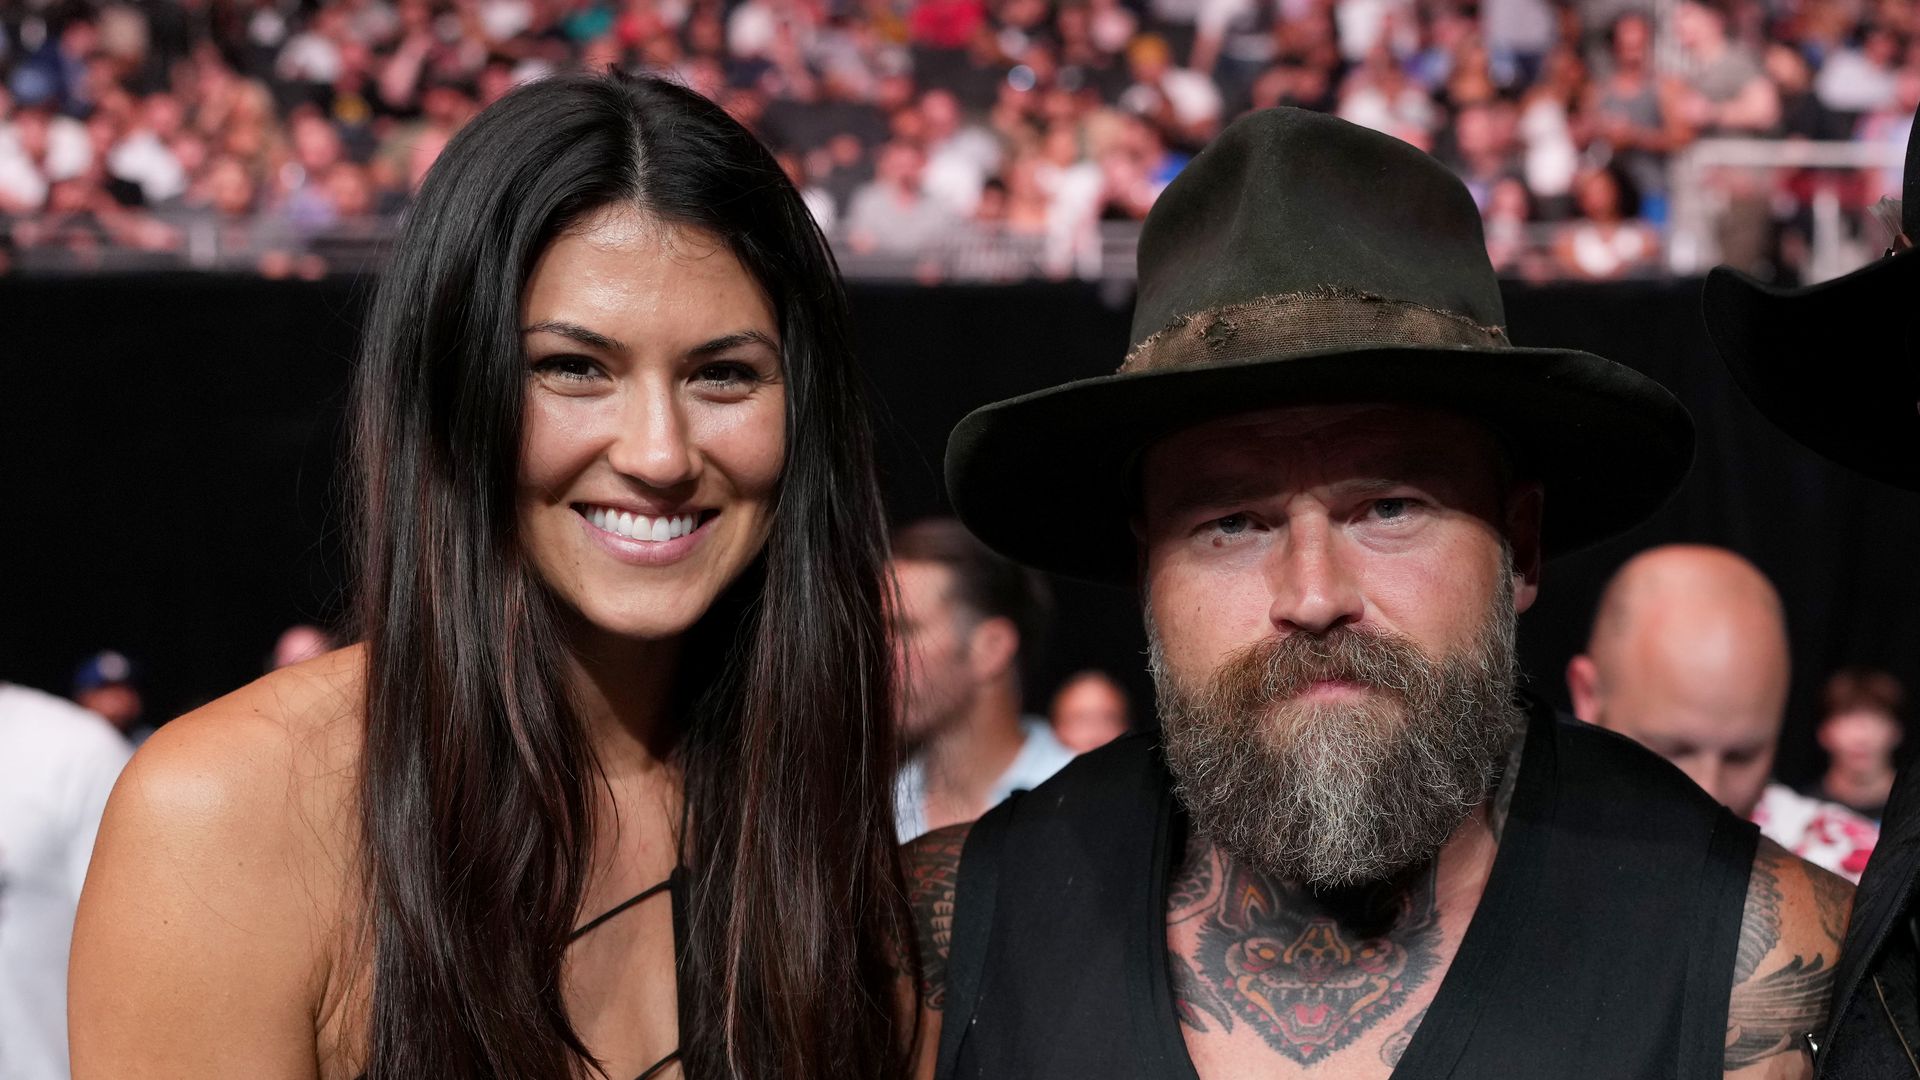 Why Zac Brown filed a restraining order against his wife over an Instagram post –– her allegations in it